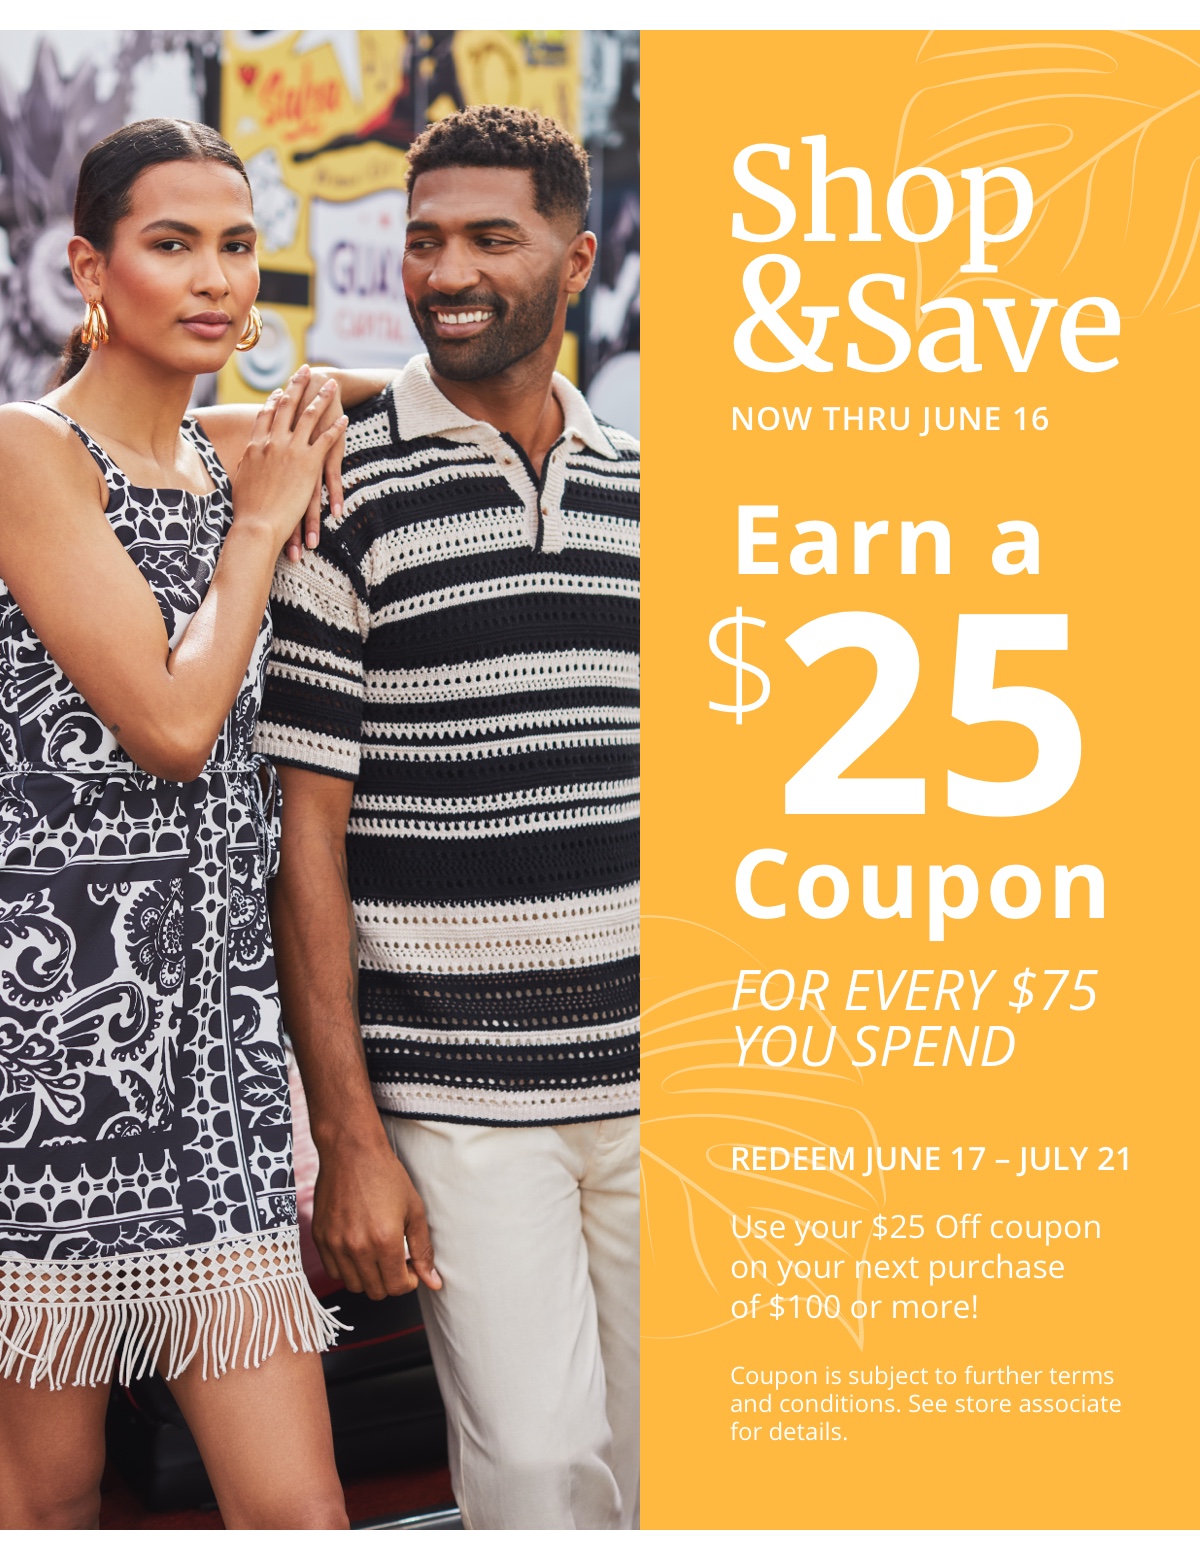 Shop and Save|Now Thru June 16|Earn a| $25| Coupon|For Every $75 |You Spend|Redeem June 17 - July 21|Use your $25 Off coupon| on your next purchase| of $100 or more!|Coupon is subject to further terms| and conditions. See store associate| for details.